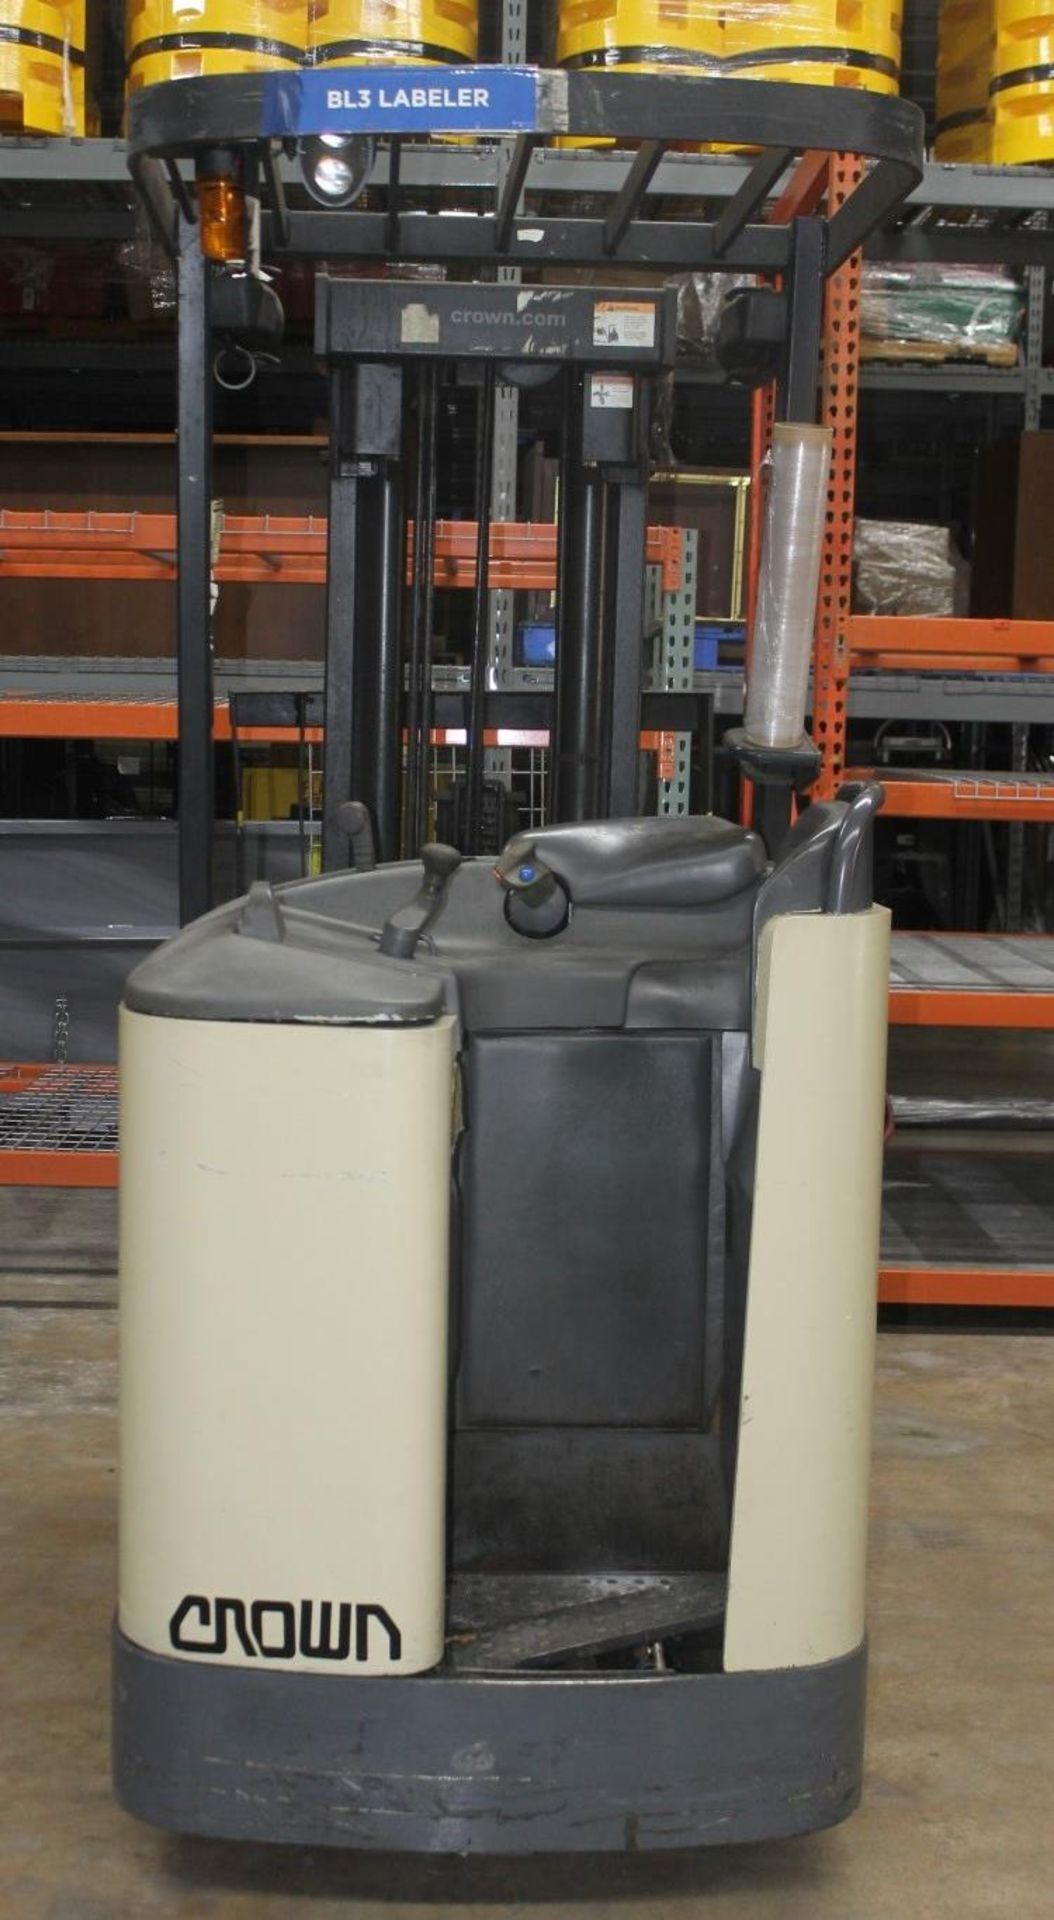 2003 CROWN 3000 LBS. CAPACITY ELECTRIC STAND UP FORKLIFT, (WATCH VIDEO) - Image 5 of 5